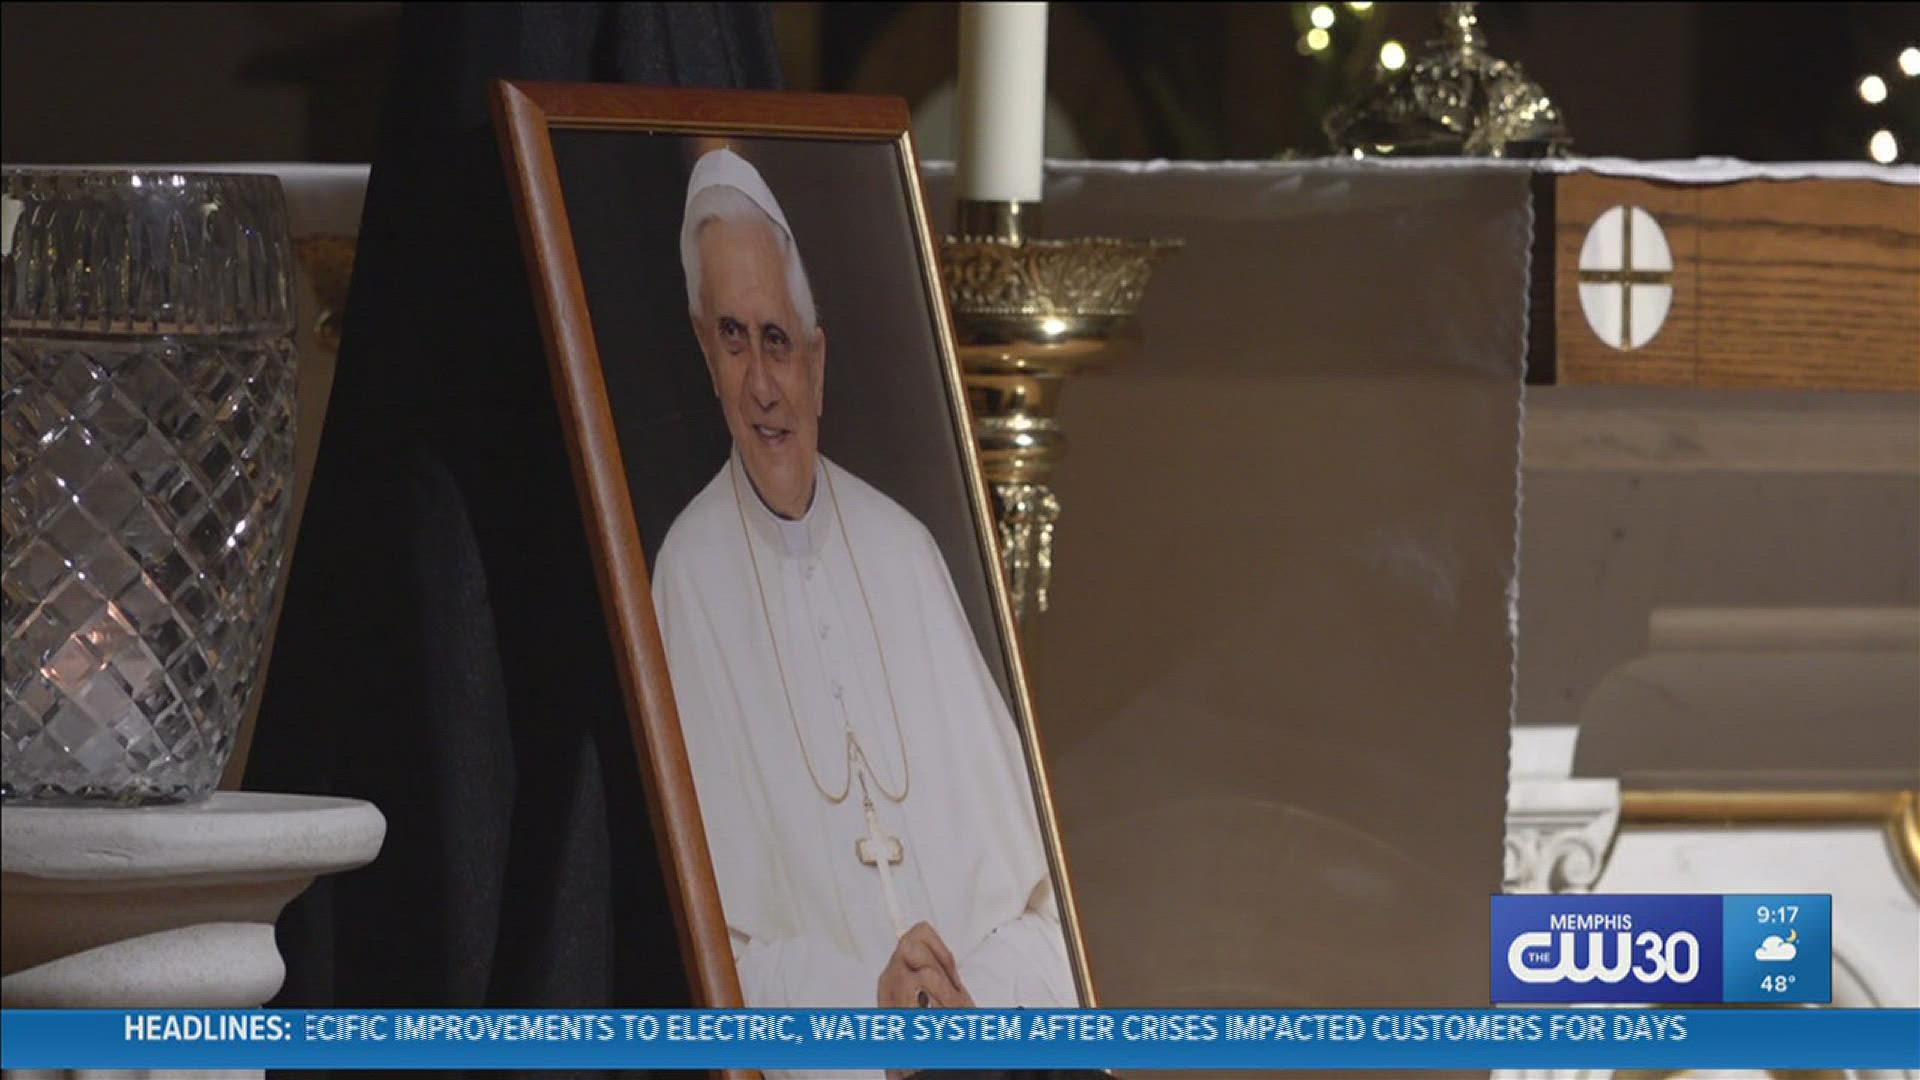 The Holy Hour for the former Pope was held at the Church of the Immaculate Conception in Memphis Wednesday